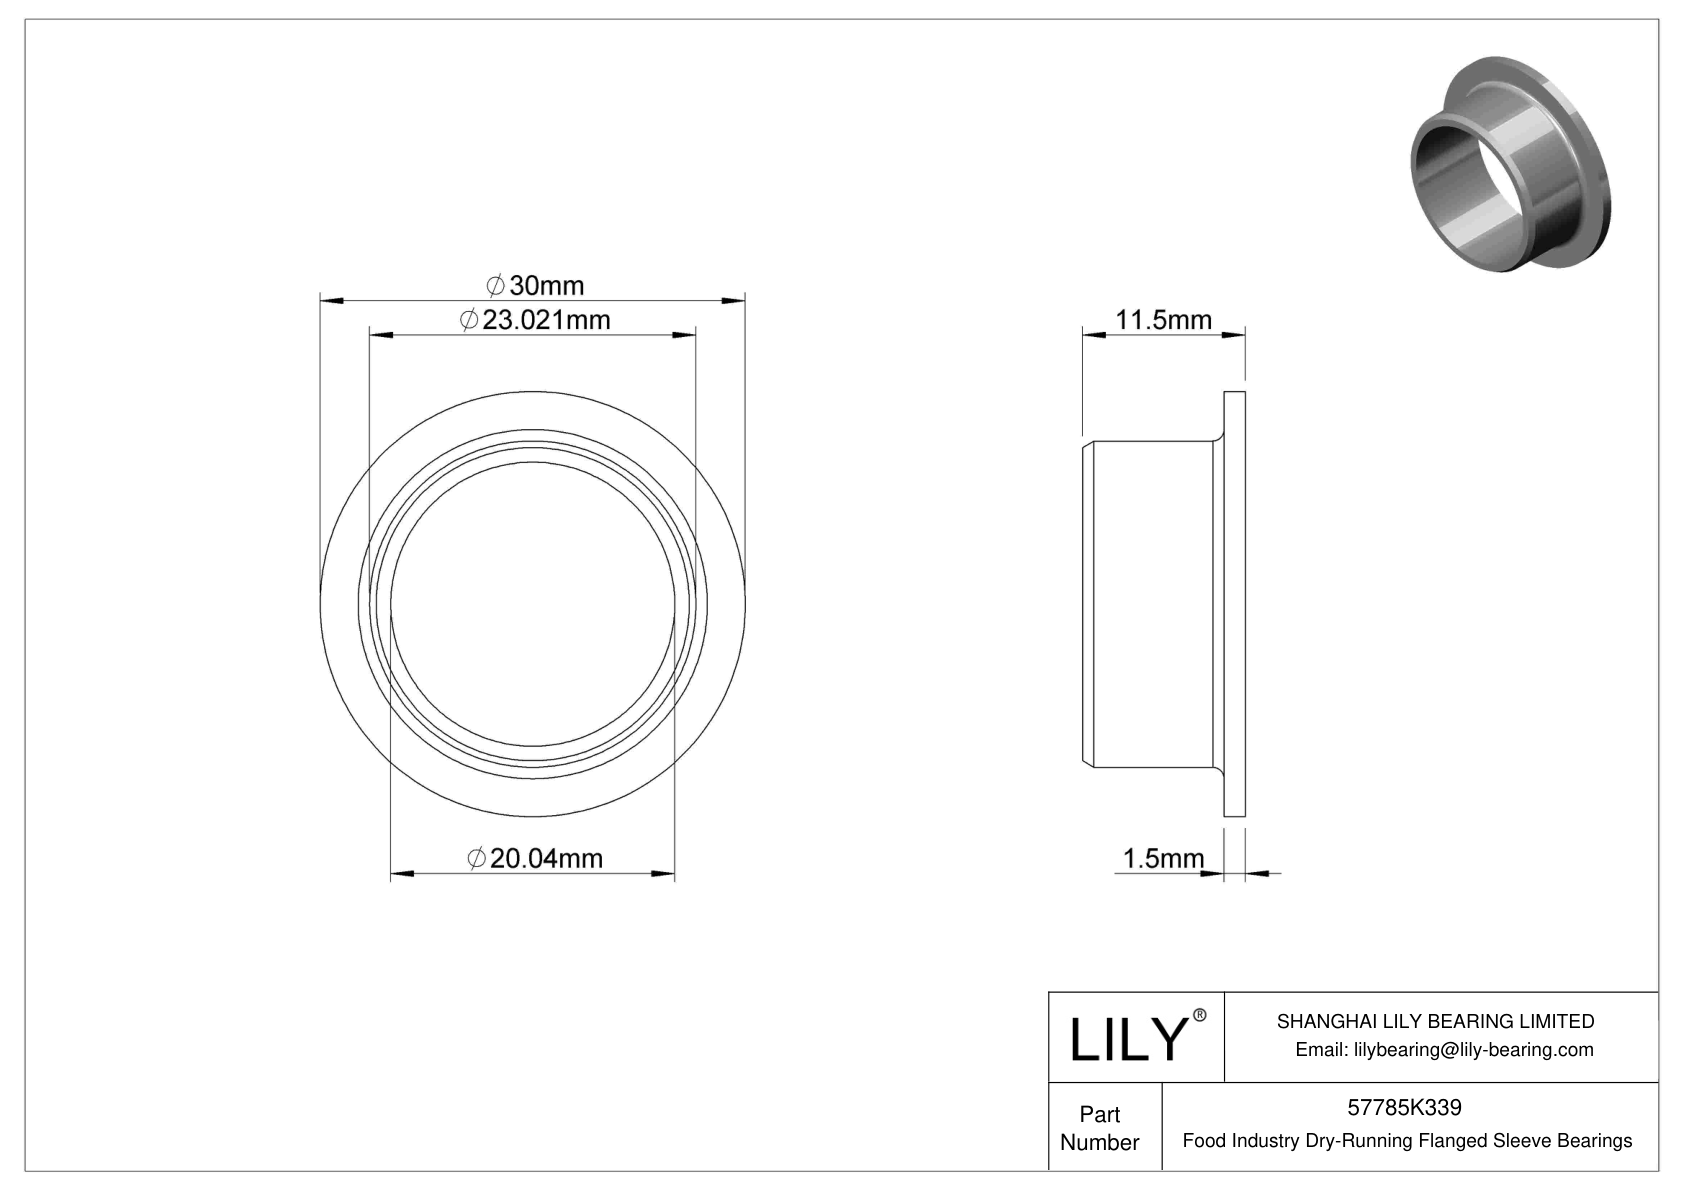 FHHIFKDDJ Food Industry Dry-Running Flanged Sleeve Bearings cad drawing